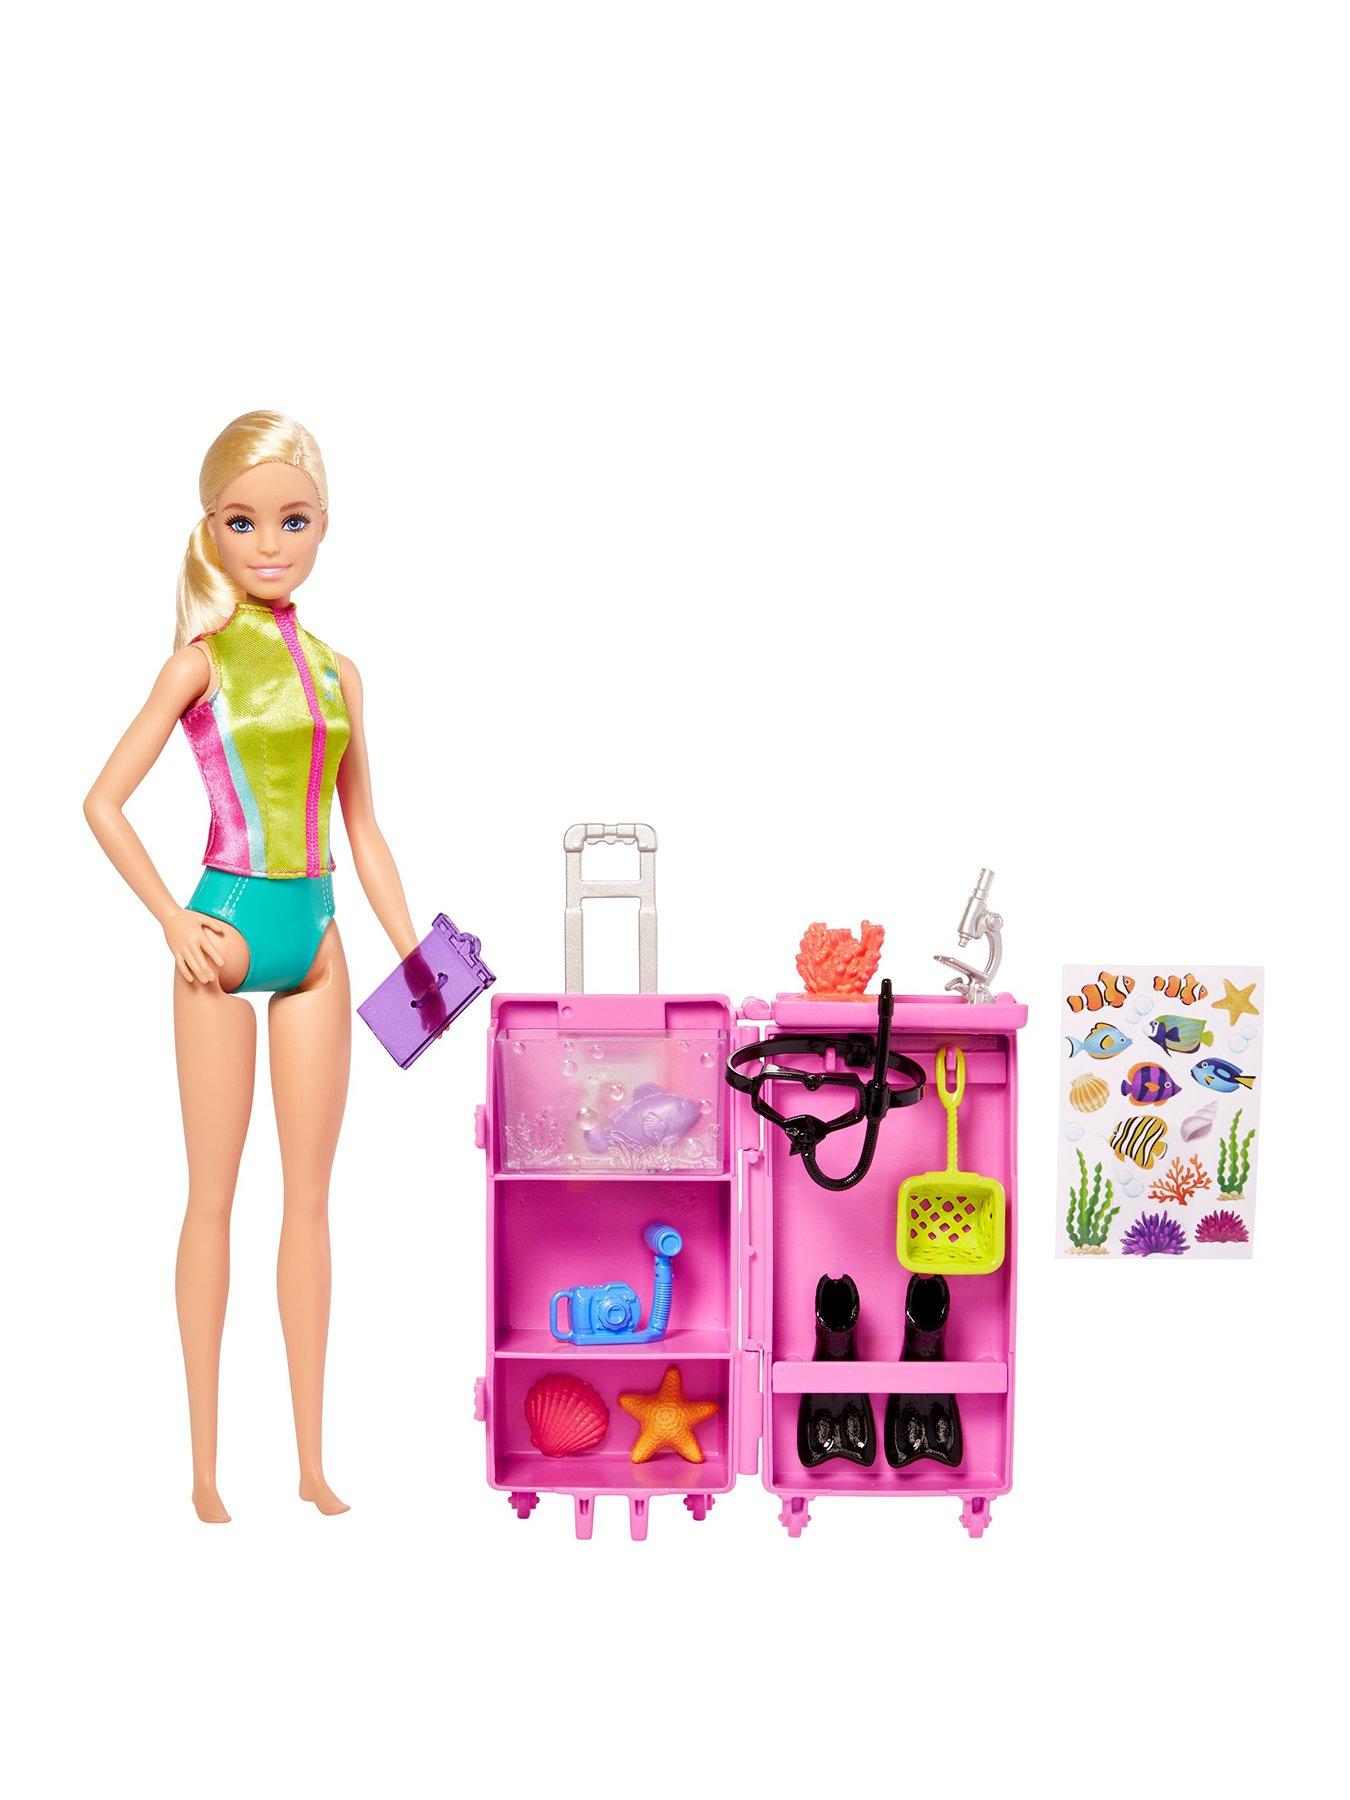 Barbie Dreamhouse Adventures Doll & Accessories, Travel Set with Daisy Doll,  Kitten, Working Suitcase & 9 Pieces, Playsets -  Canada